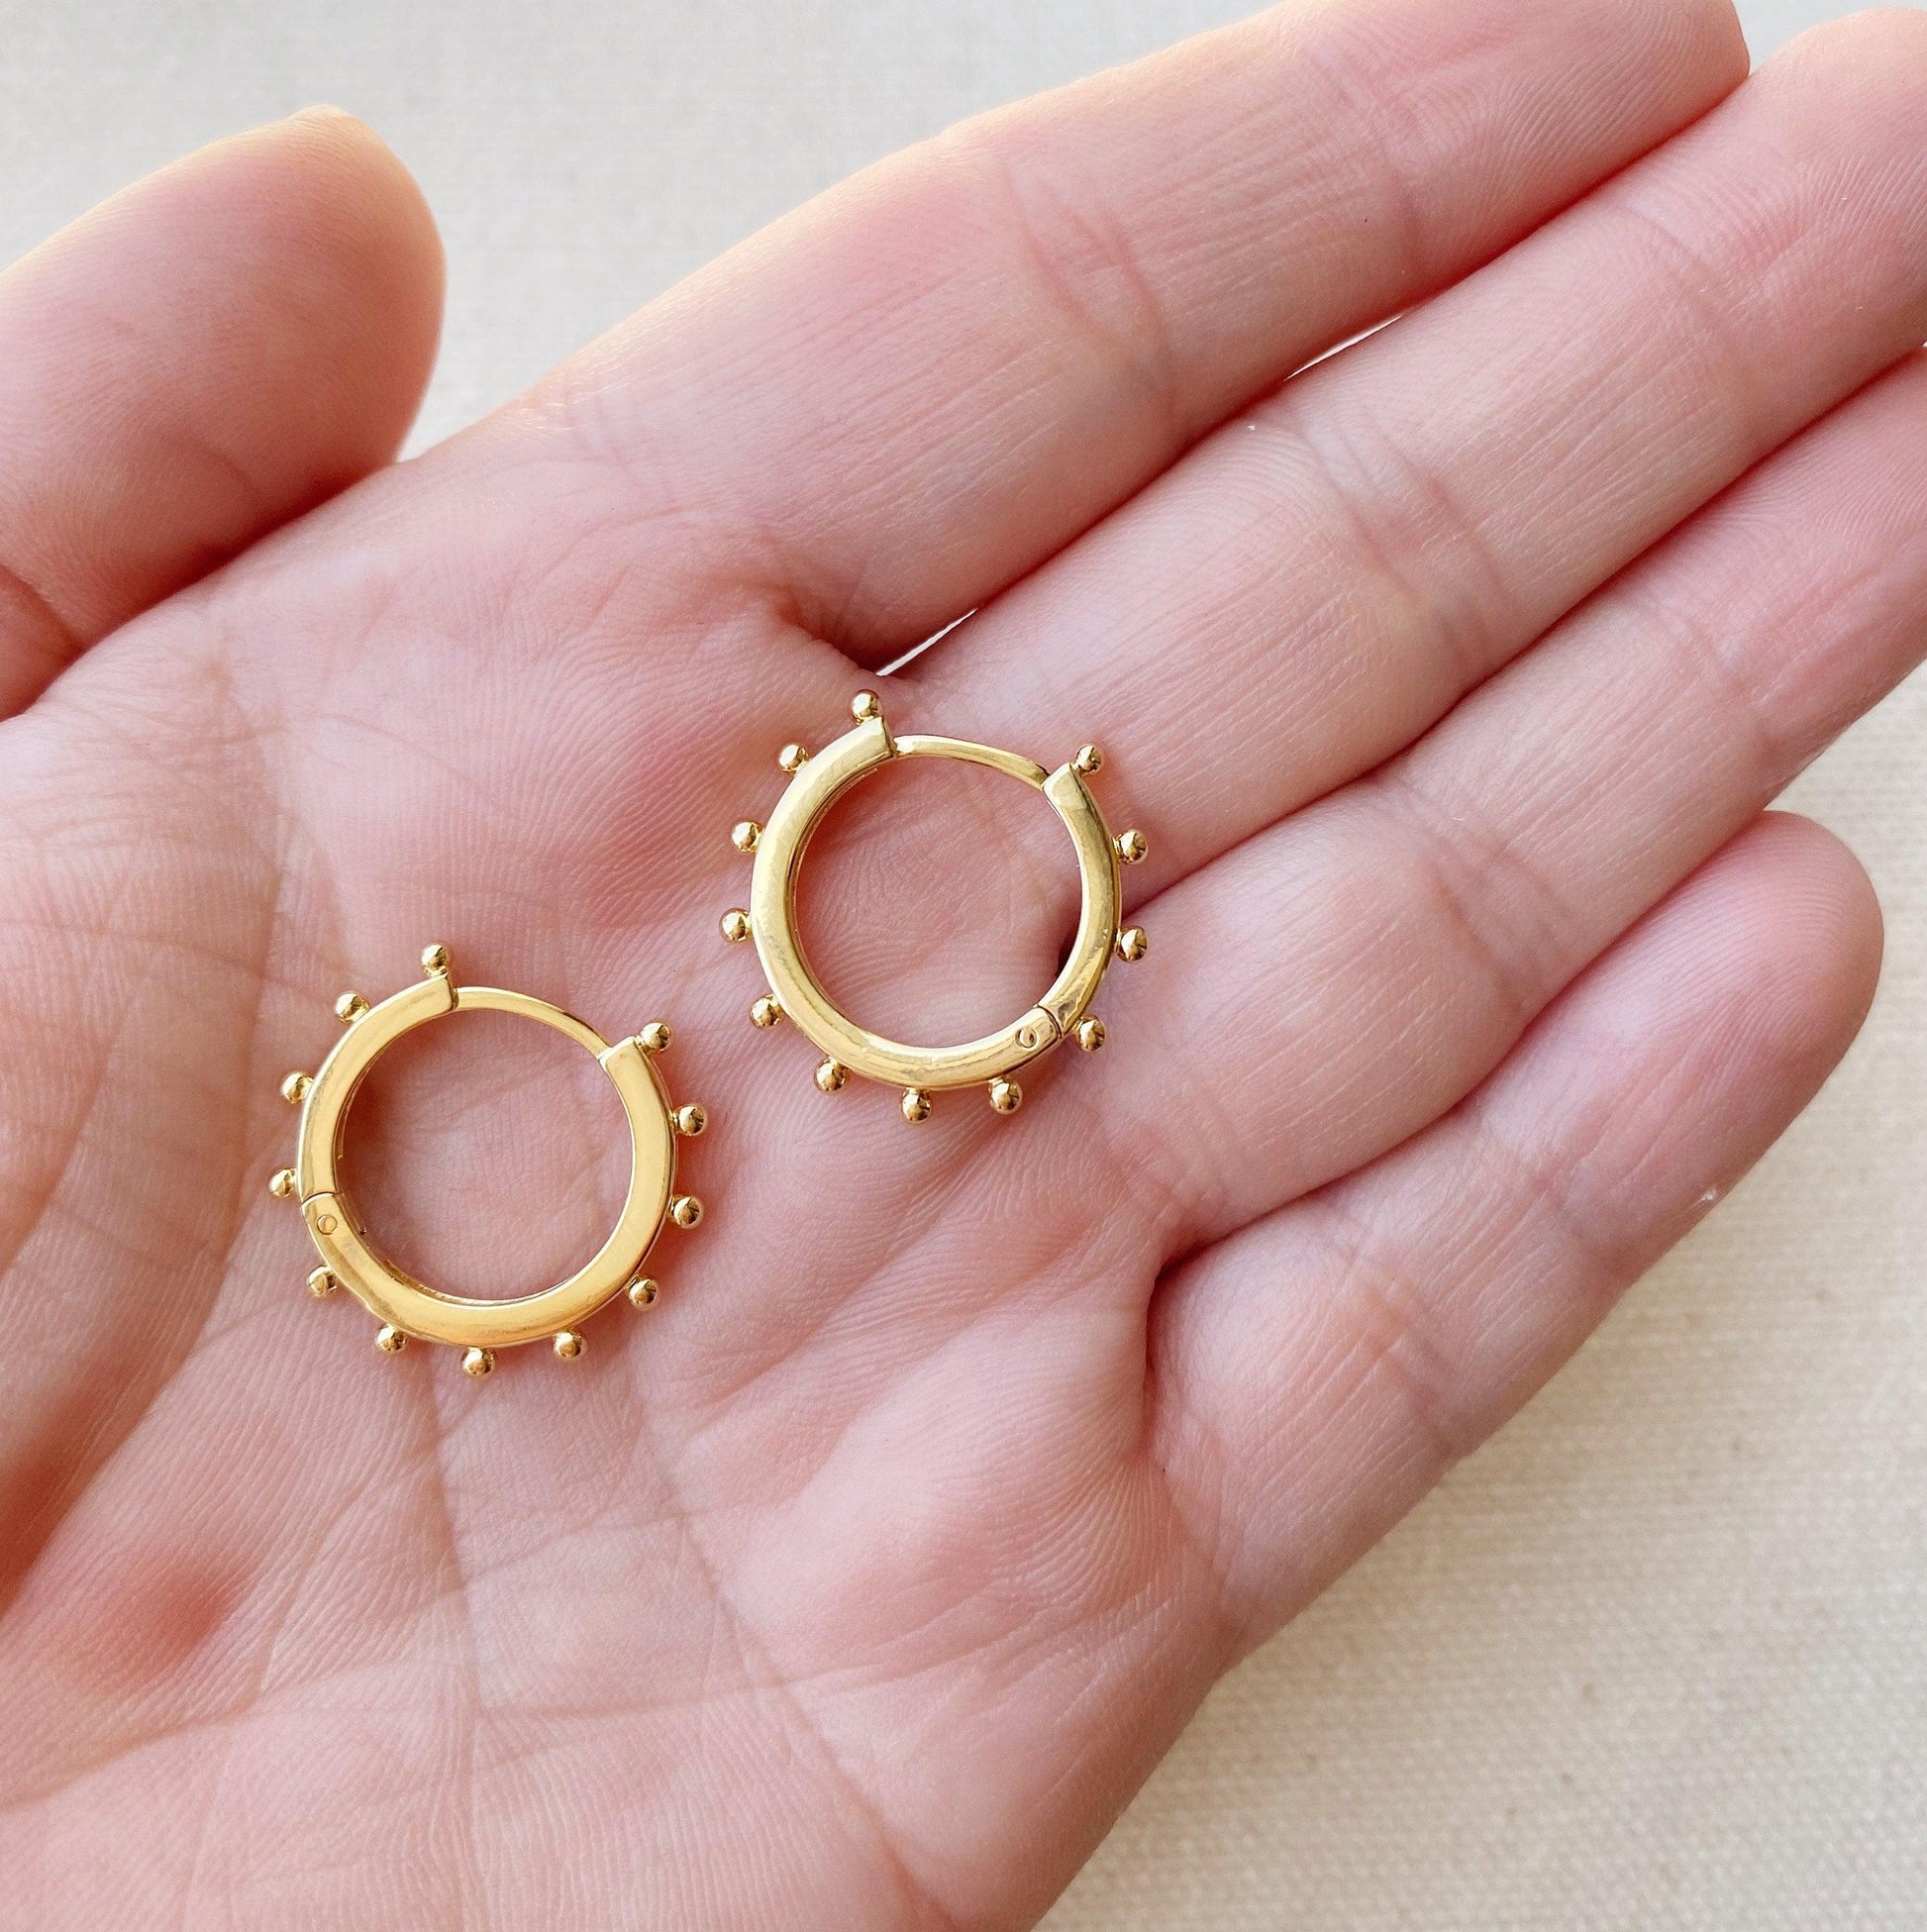 GoldFi 18k Gold Filled Hoop Earrings With Ball Around For Wholesale and Jewelry Supplies